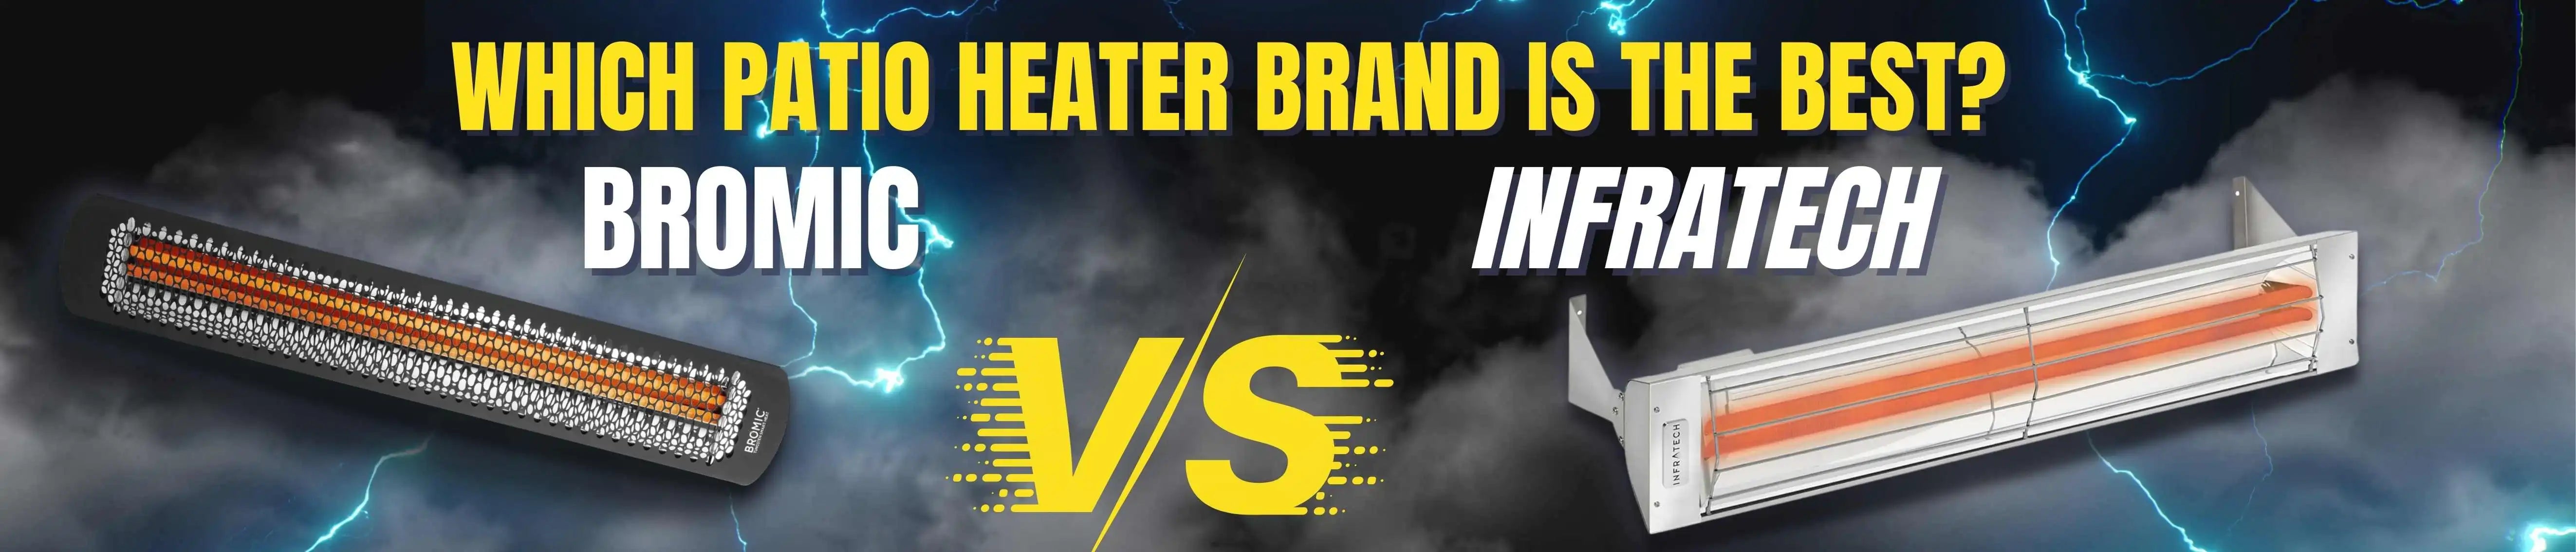 Bromic vs Infratech: Which Patio Heater Brand is the Best? | Flame Authority - Trusted Dealer